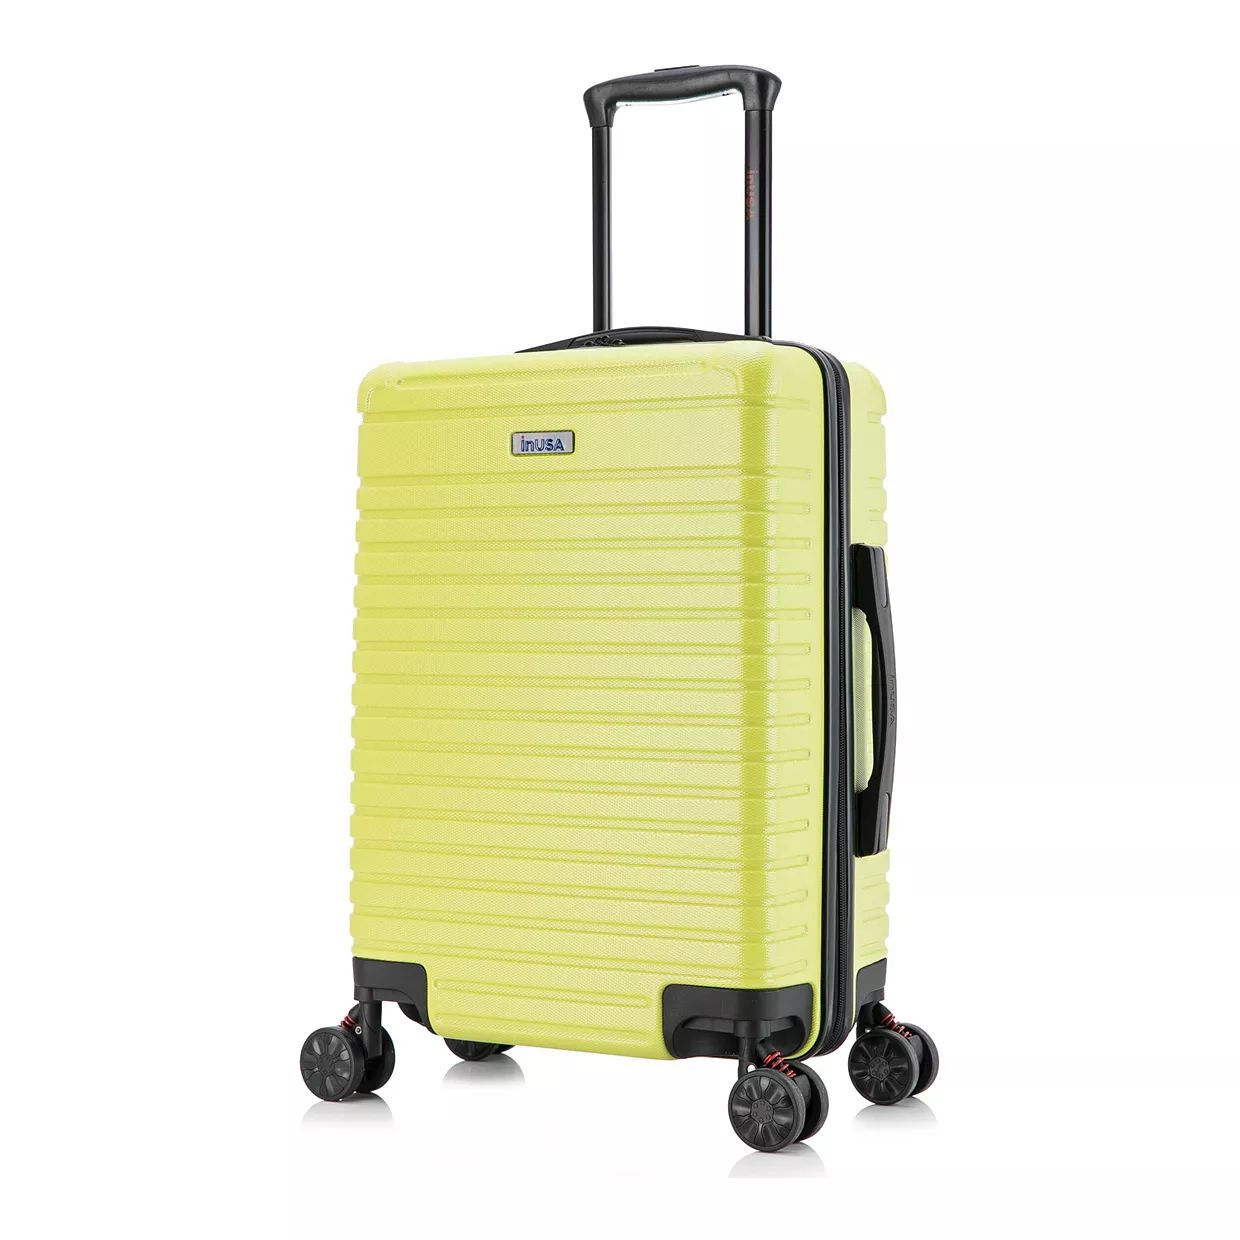 InUSA Deep 20-Inch Carry-On Hardside Spinner Luggage | Kohl's